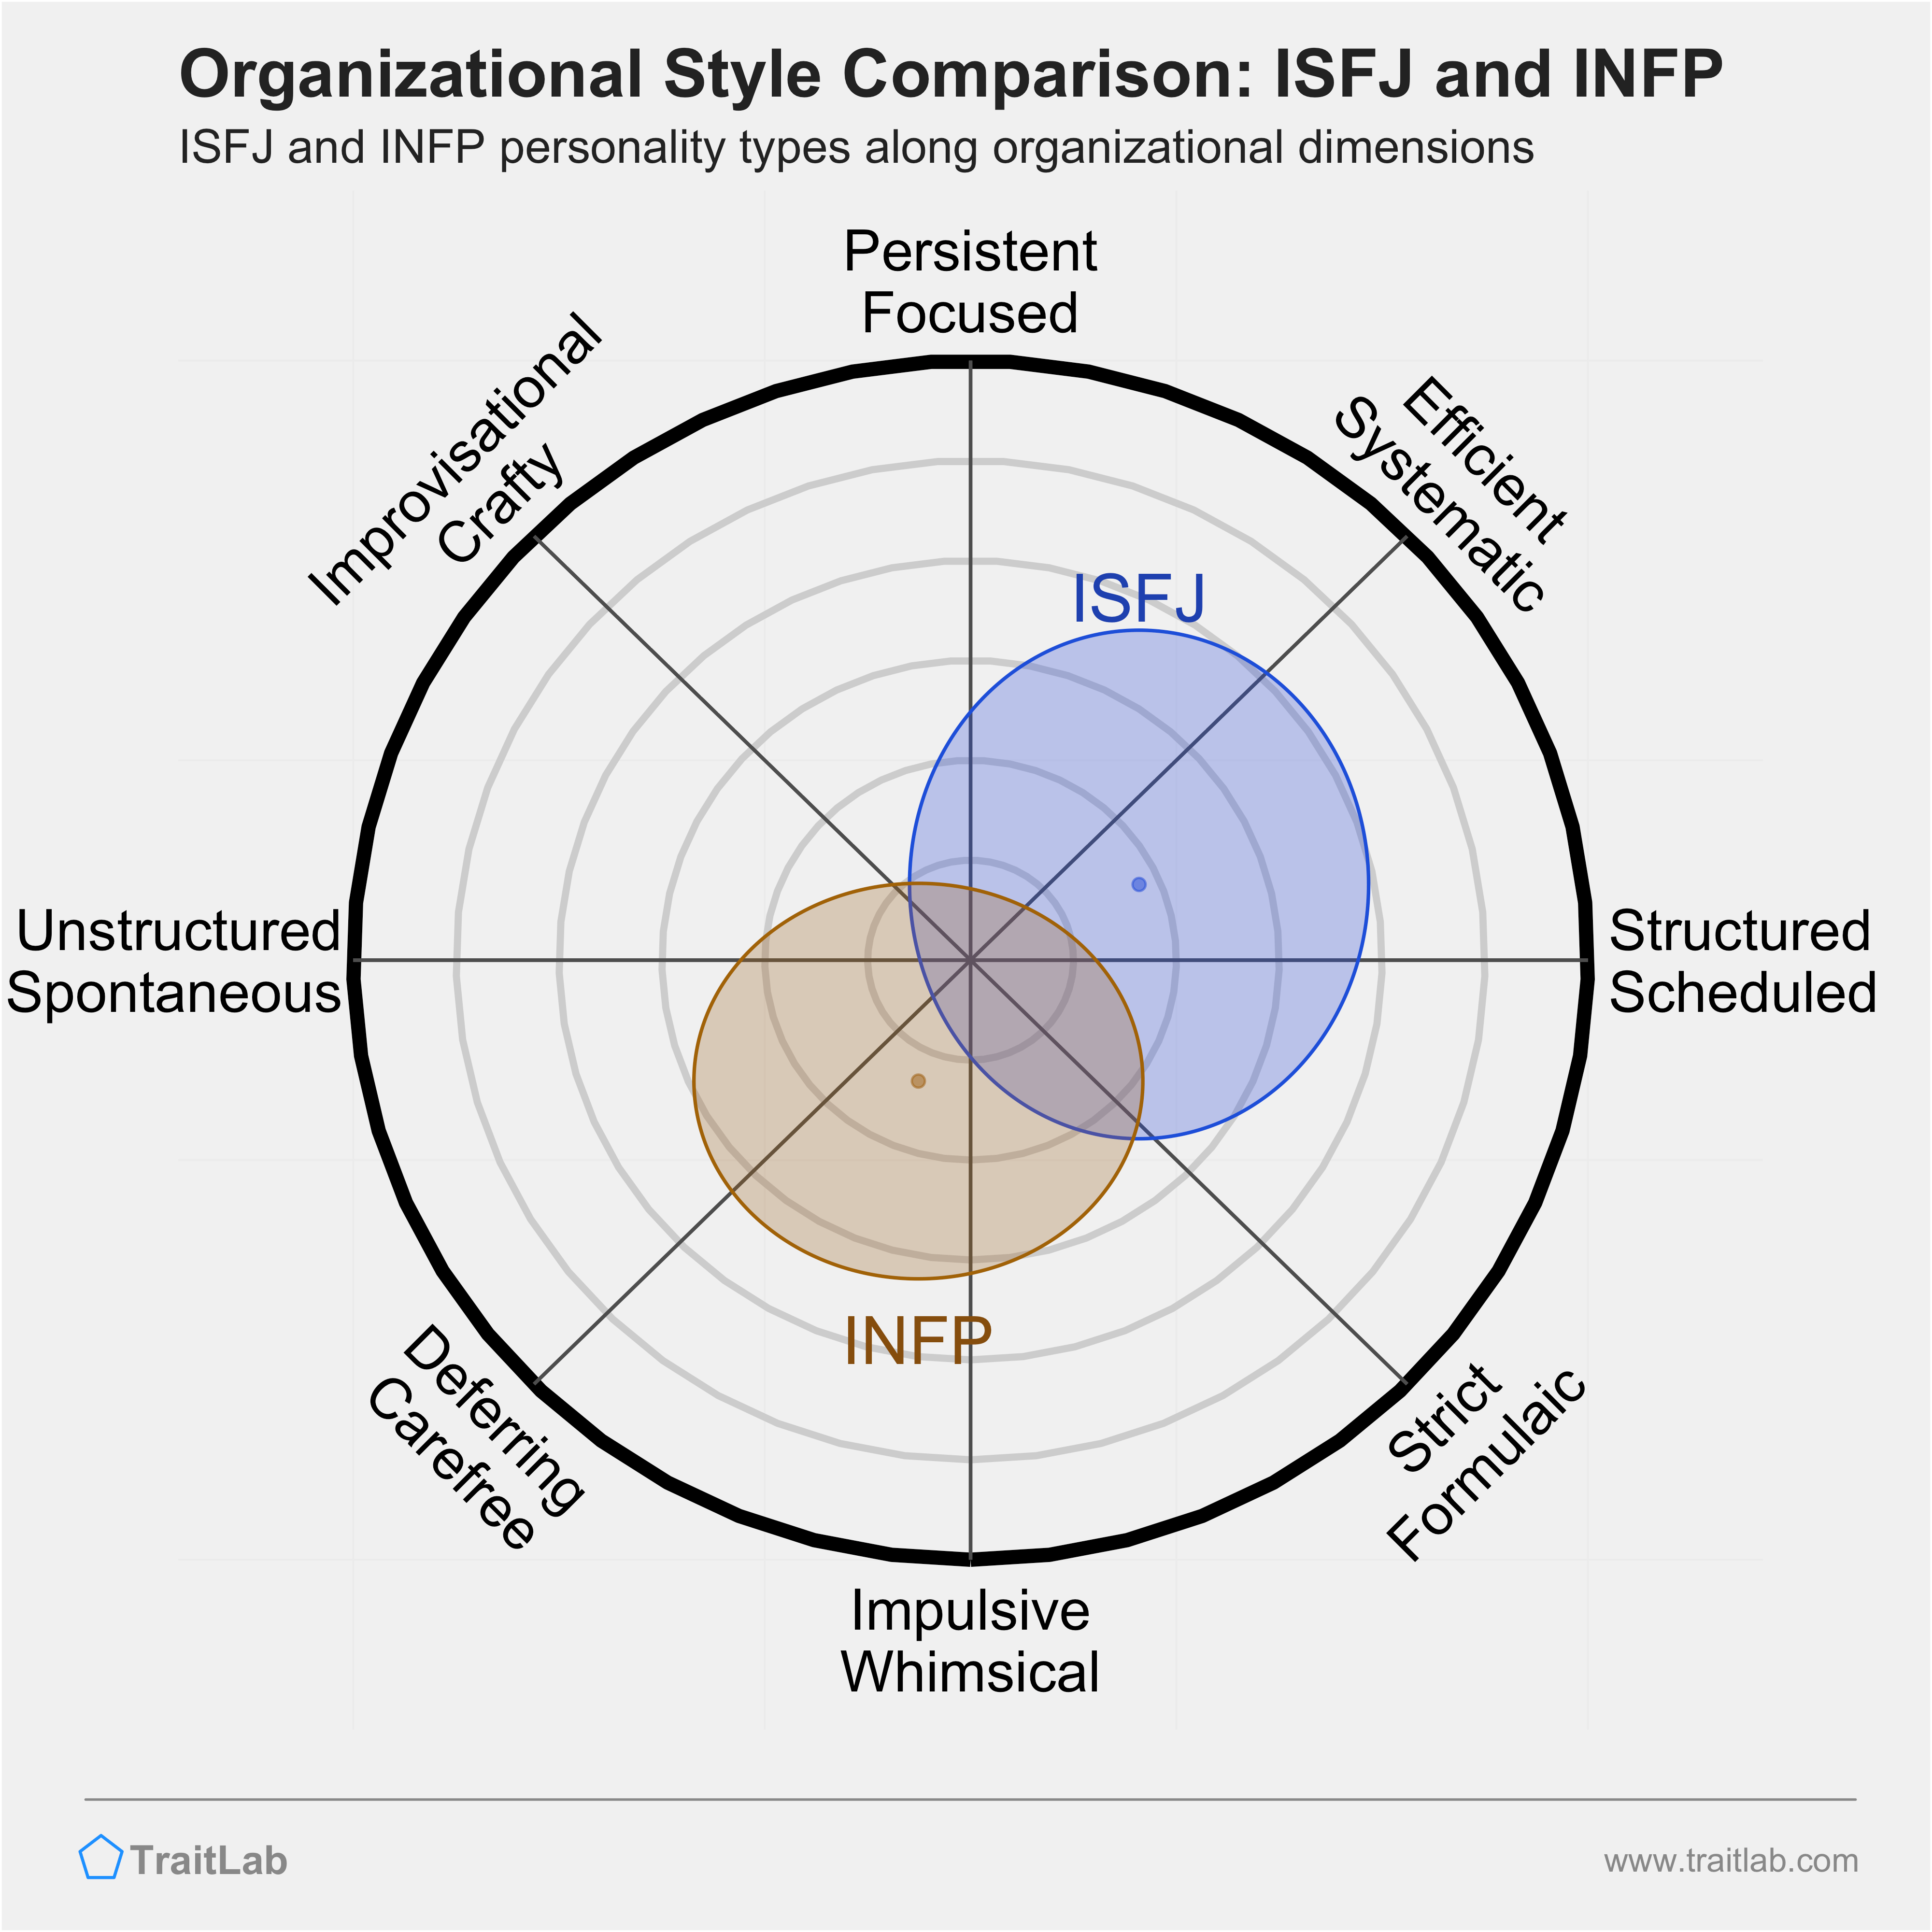 ISFJ and INFP comparison across organizational dimensions